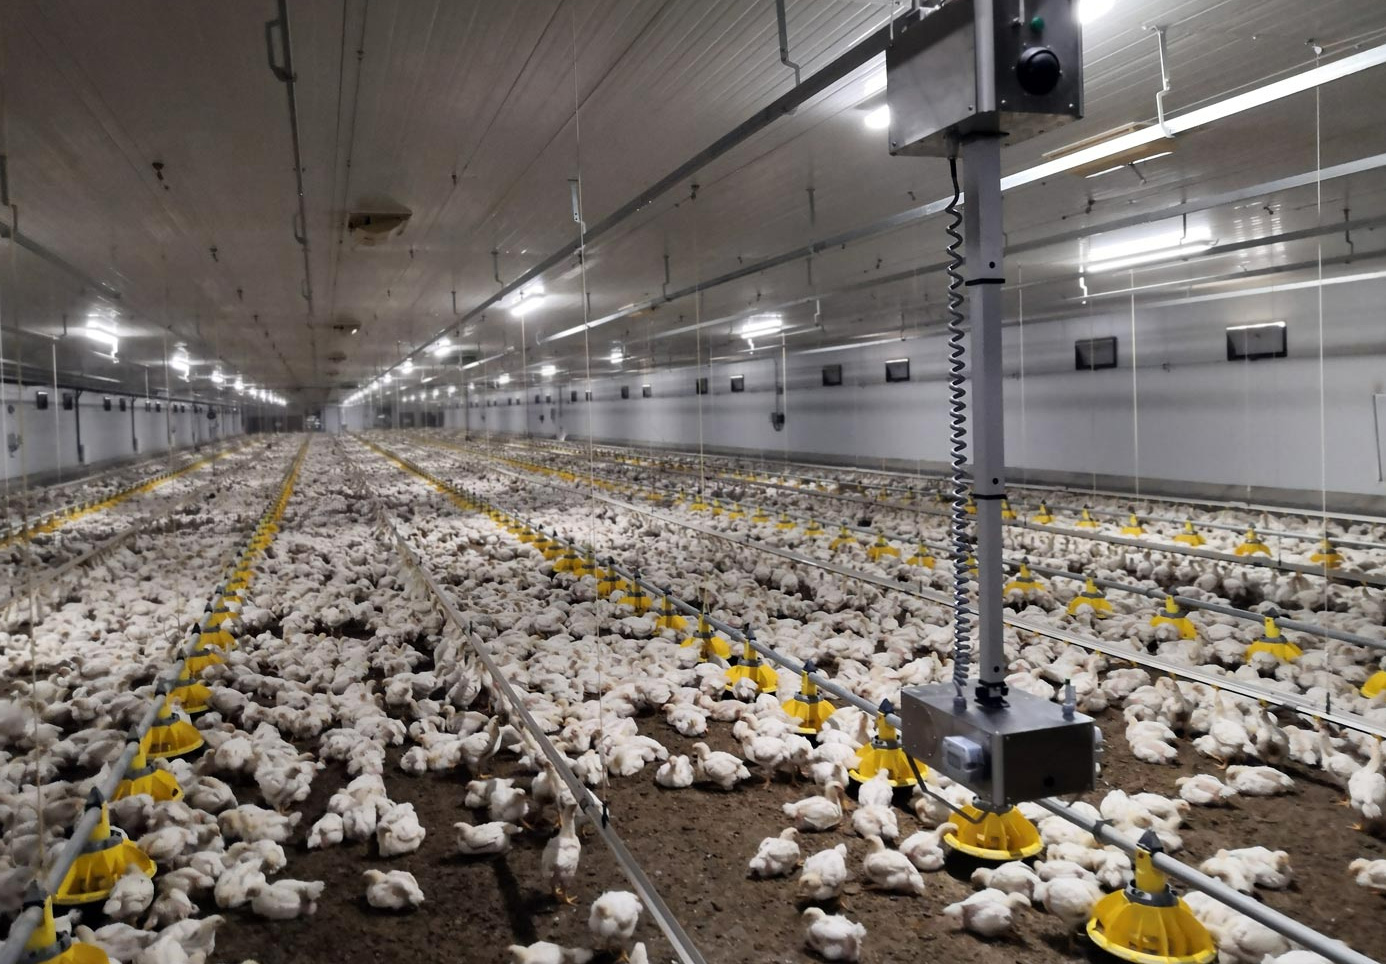 The rail-mounted robot uses a complete set of sensors to measure thermal sensation, air quality, light and sound in poultry housing.